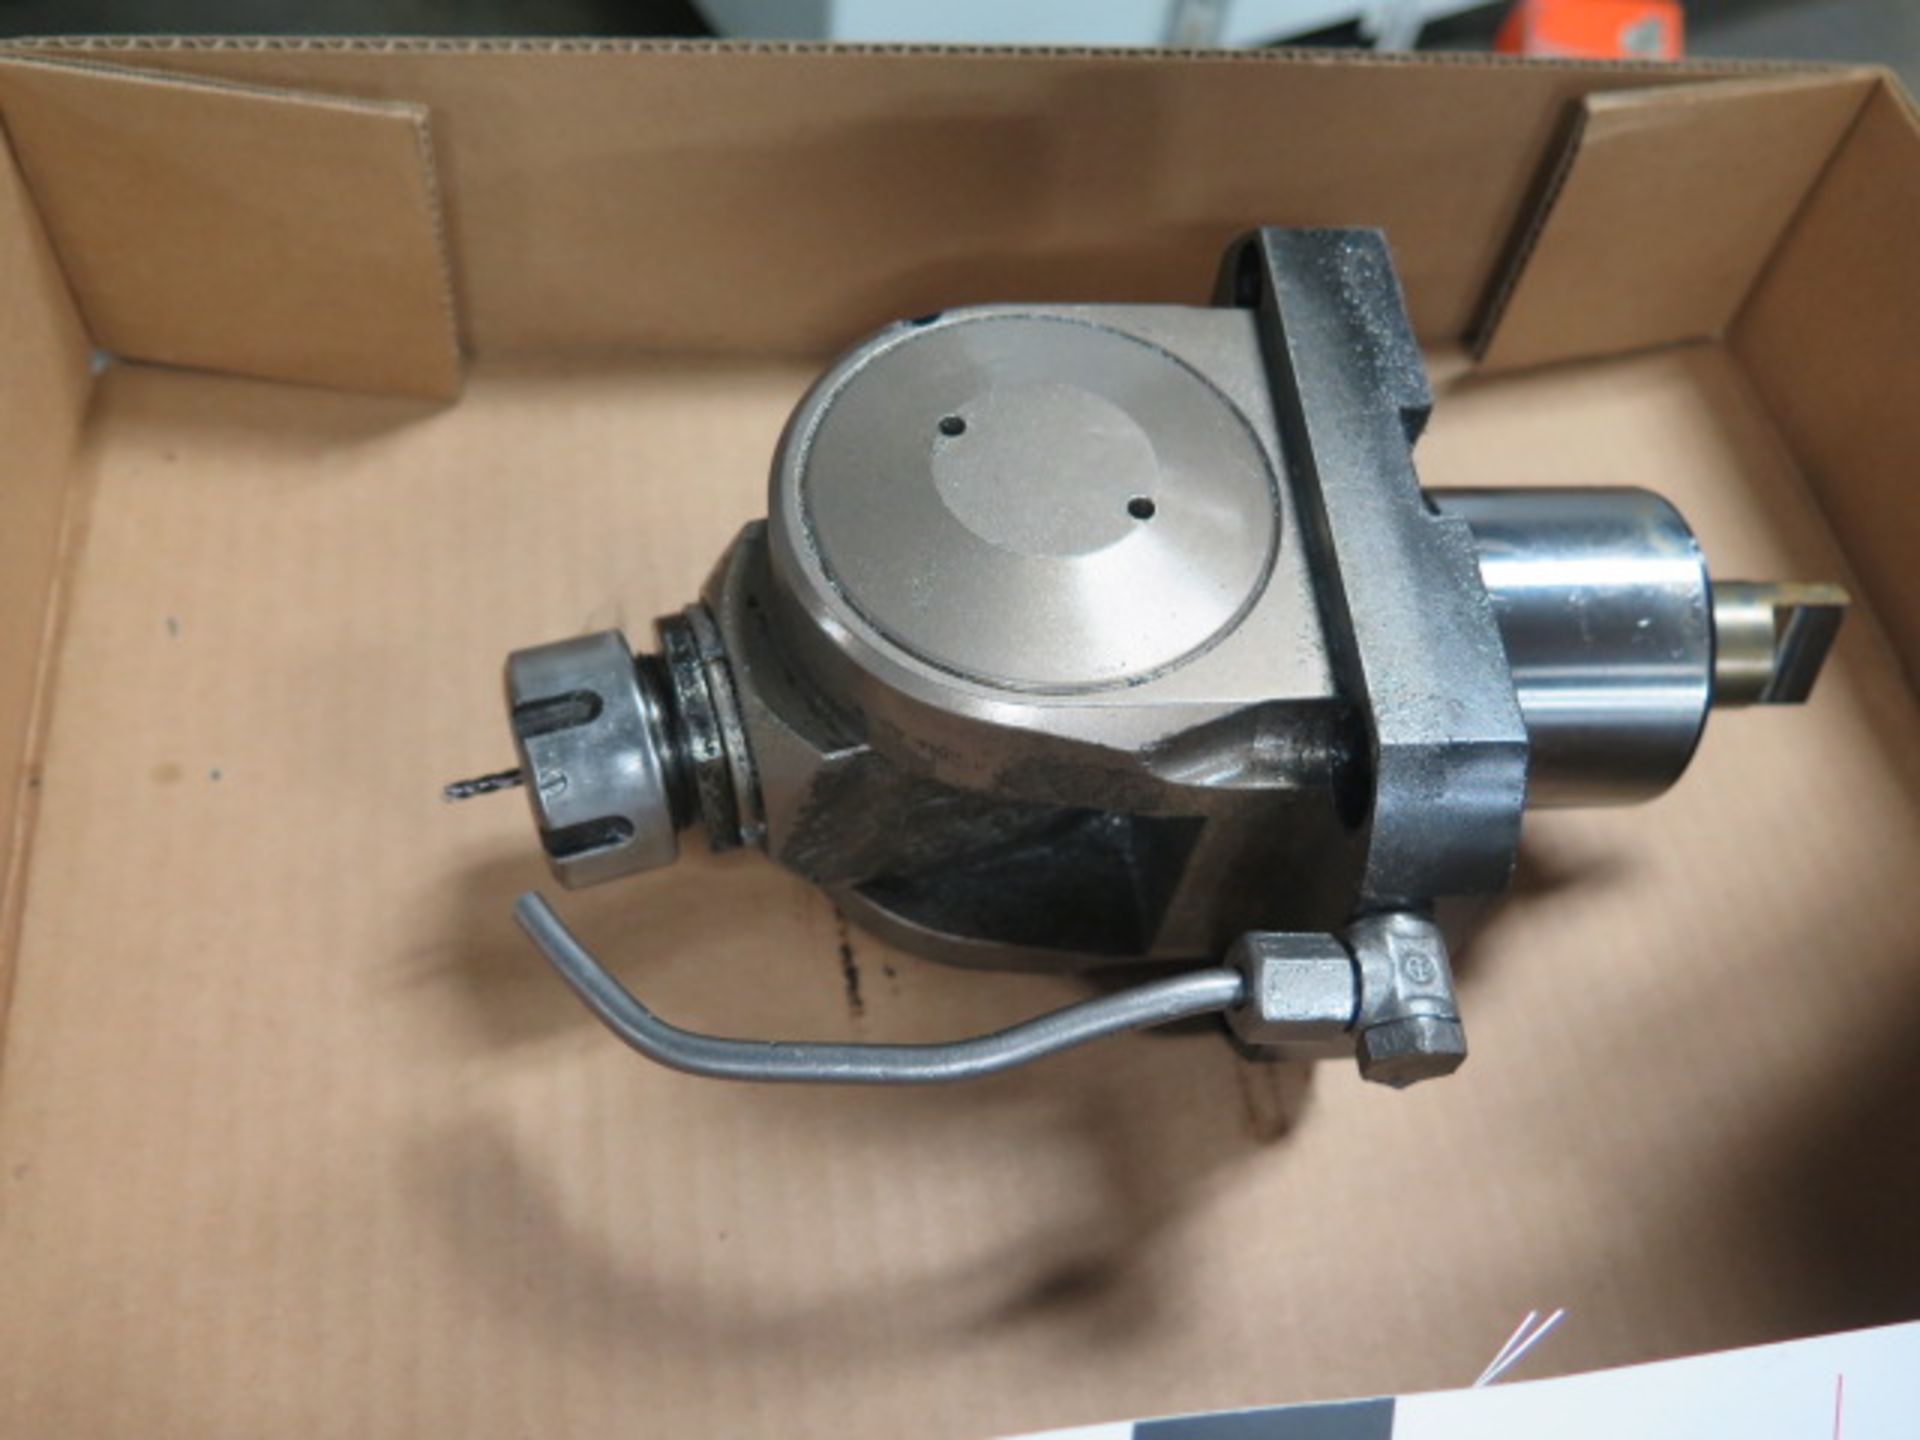 MD Adjustable Angle Rotary Drilling/Milling Head(SOLD AS-IS - NO WARRANTY) - Image 2 of 5